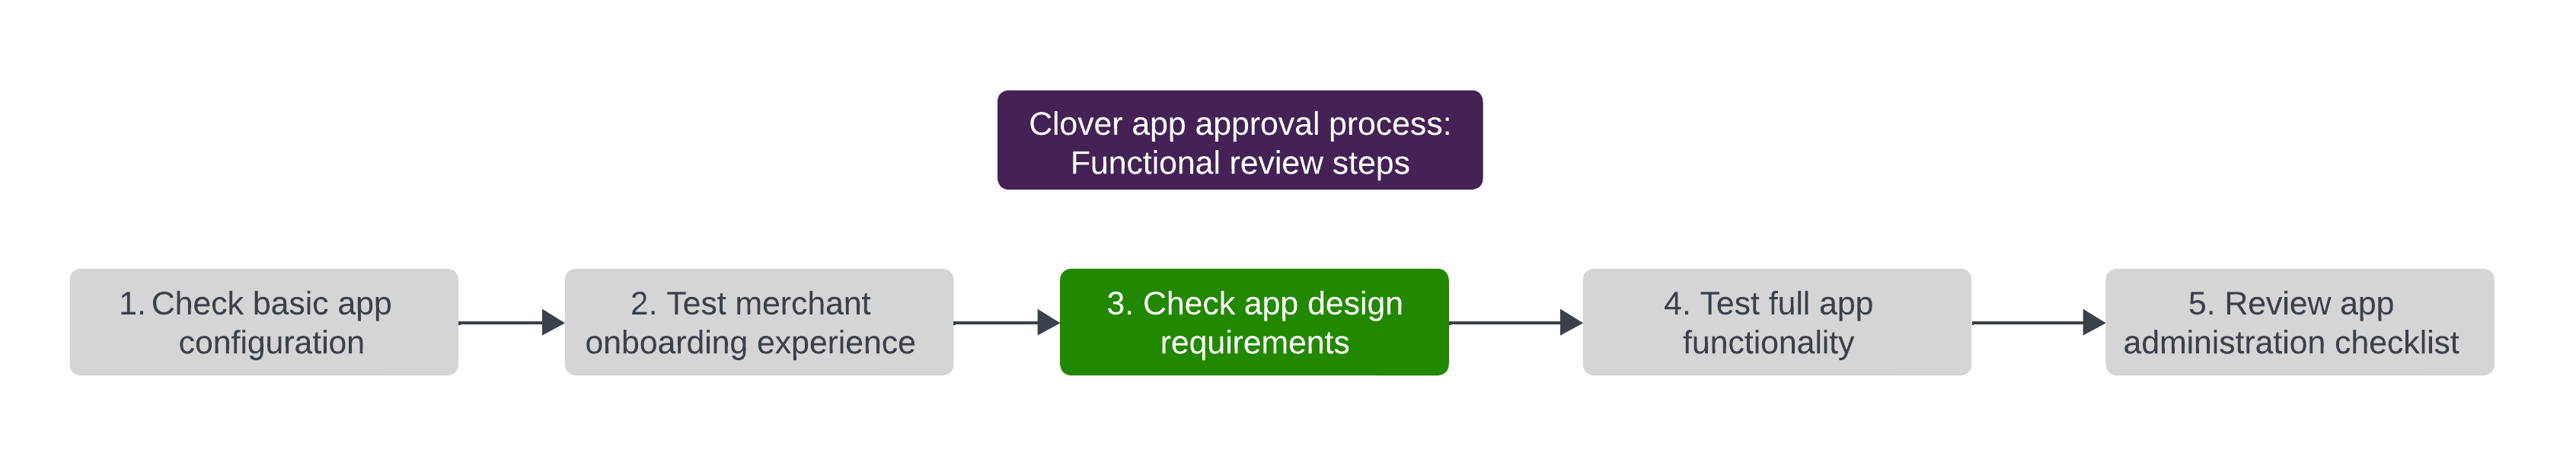 Functional review: App design requirements